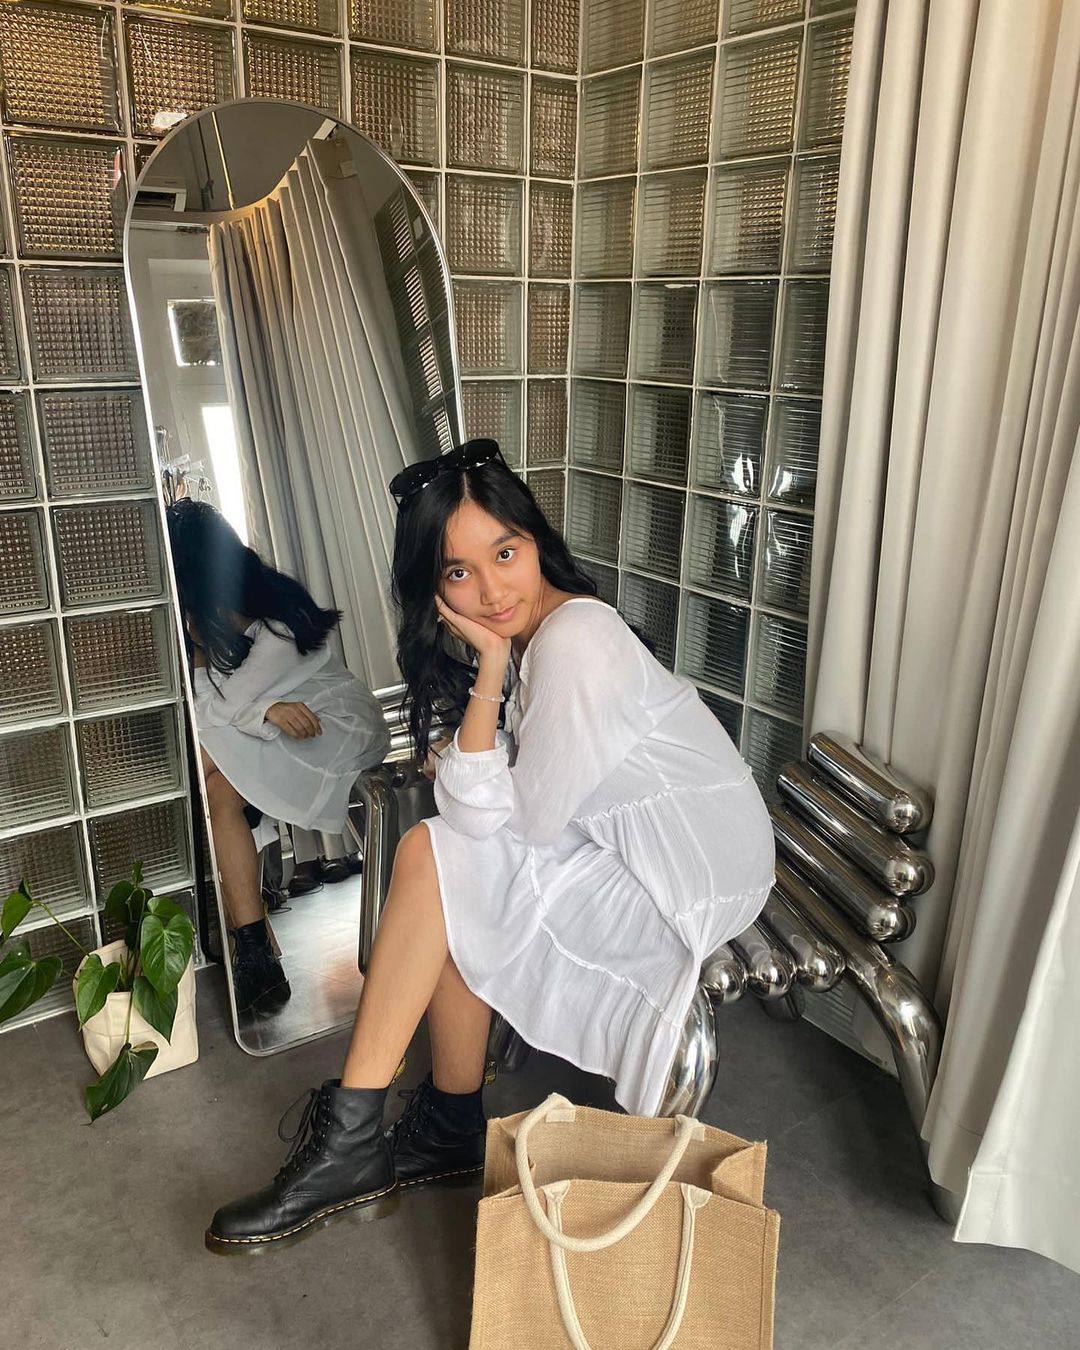 After facing social media backlash for describing a Charles & Keith handbag as ‘luxury’, 17-year-old Zoe Gabriel has been chosen to model a bag for the brand’s International Women’s Day campaign. Photo: Instagram/@zoeaaleah